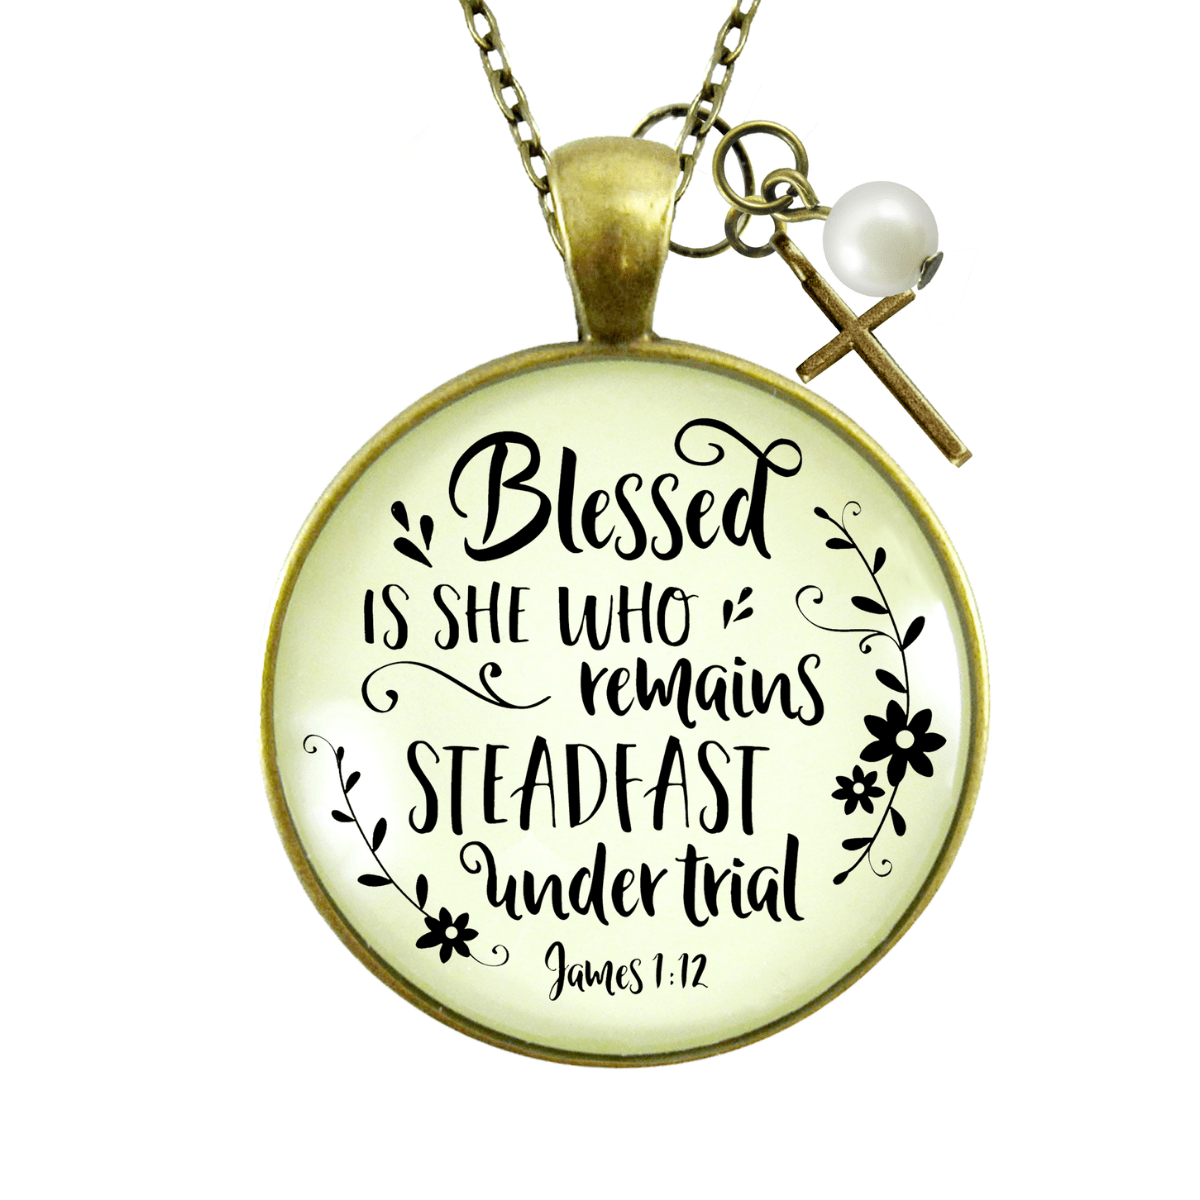 Gutsy Goodness Faith Necklace Blessed is She Who Remains Steadfast Quote Vintage Style Jewelry - Gutsy Goodness Handmade Jewelry;Faith Necklace Blessed Is She Who Remains Steadfast Quote Vintage Style Jewelry - Gutsy Goodness Handmade Jewelry Gifts